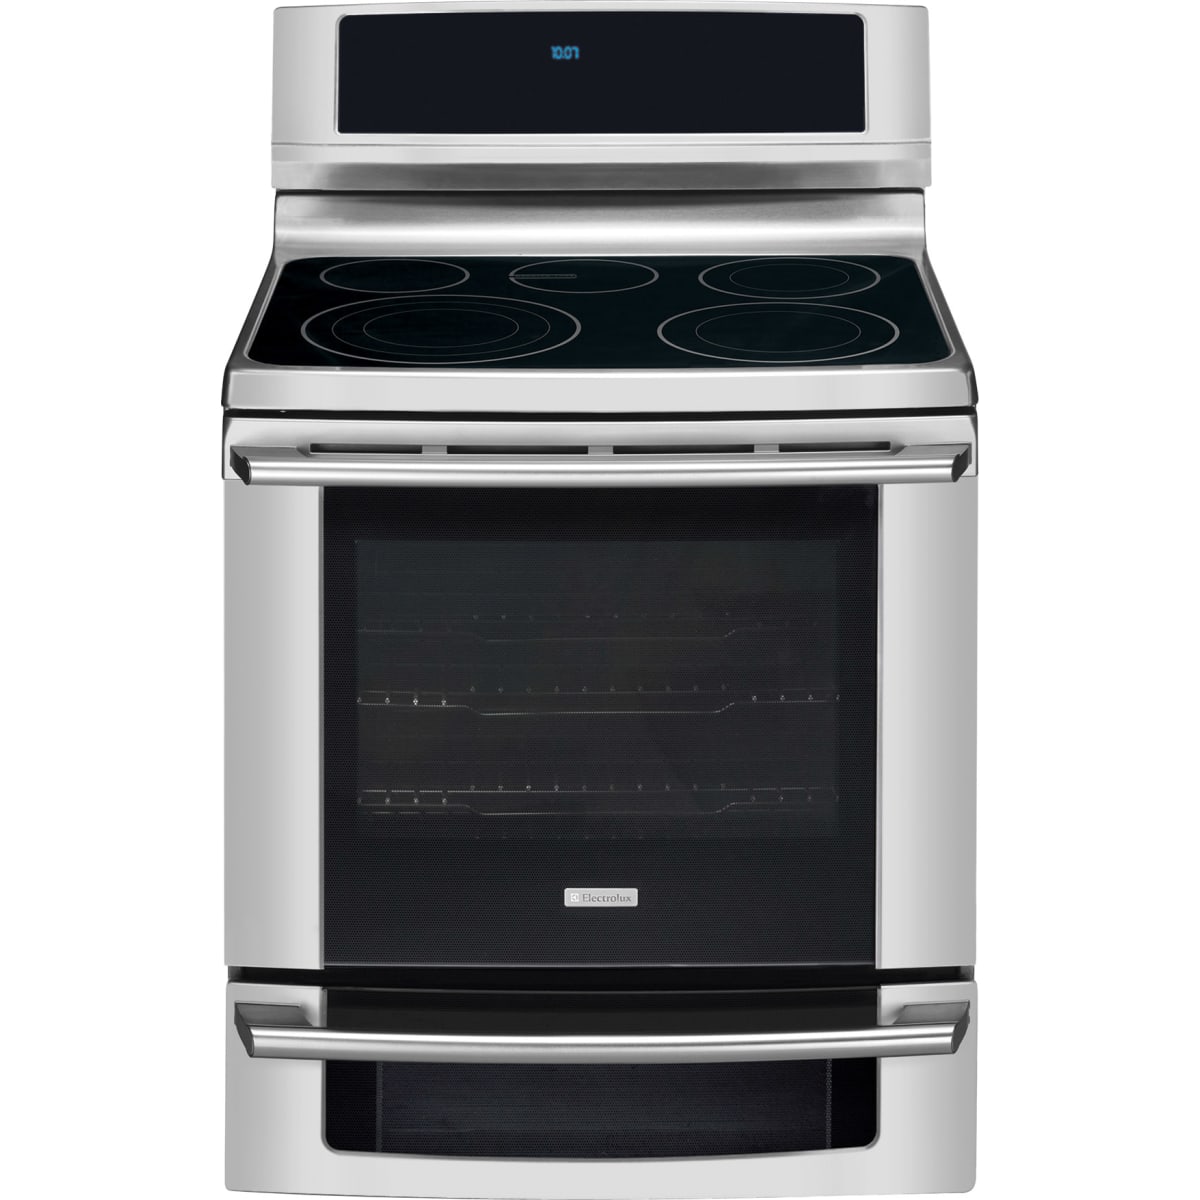 Electrolux Ew30ef65gs 30 Electric Freestanding Range With